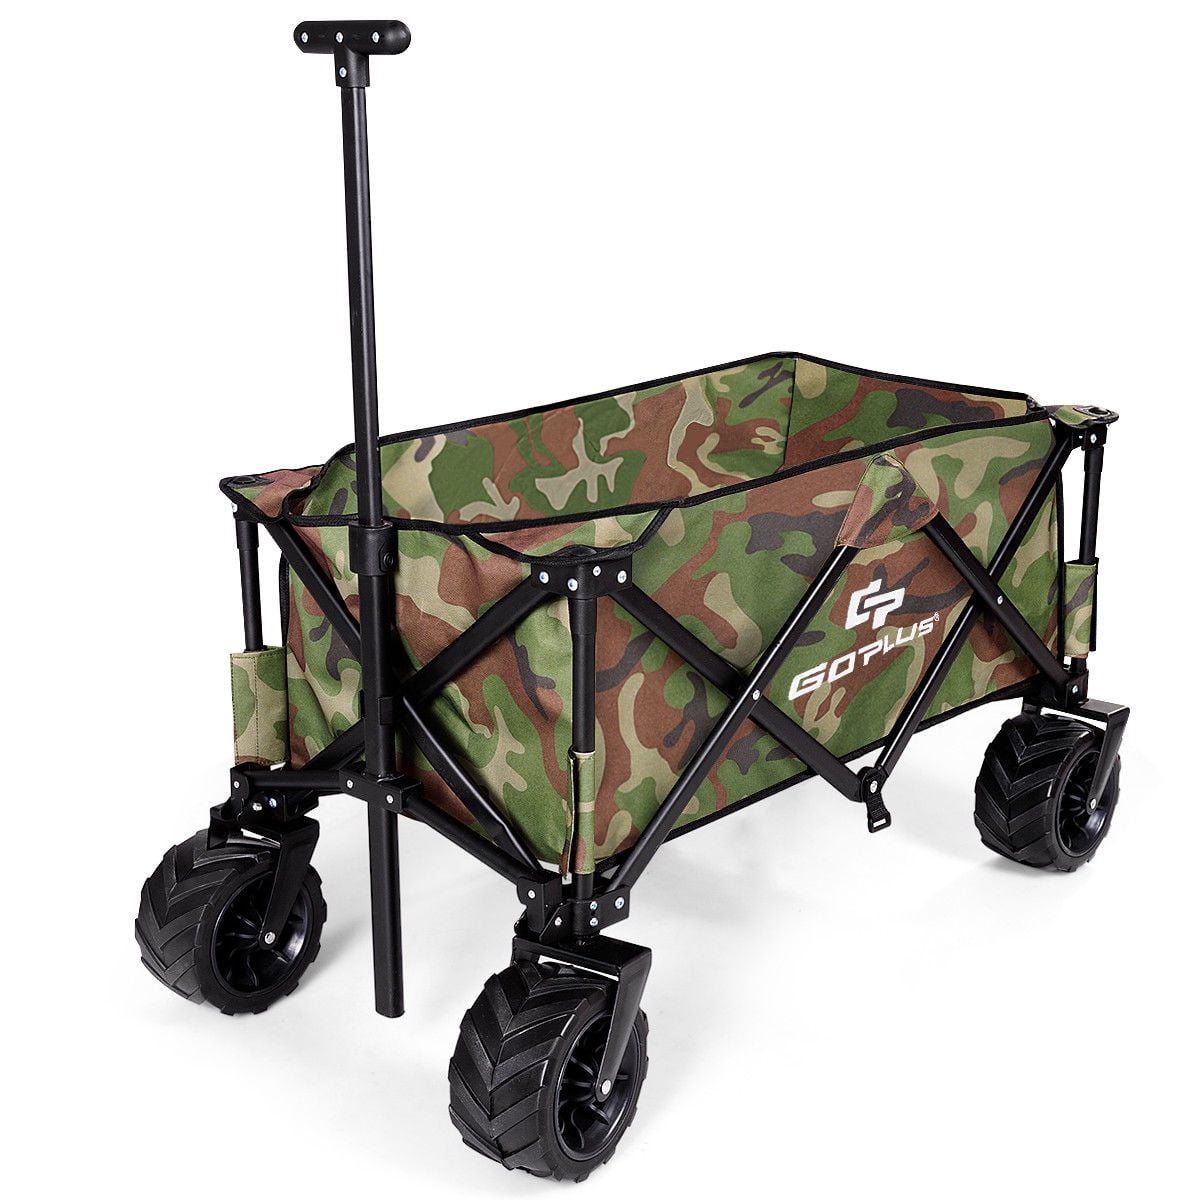 Collapsible Folding Wagon Cart W/ Canopy Outdoor Utility Garden Trolley Buggy